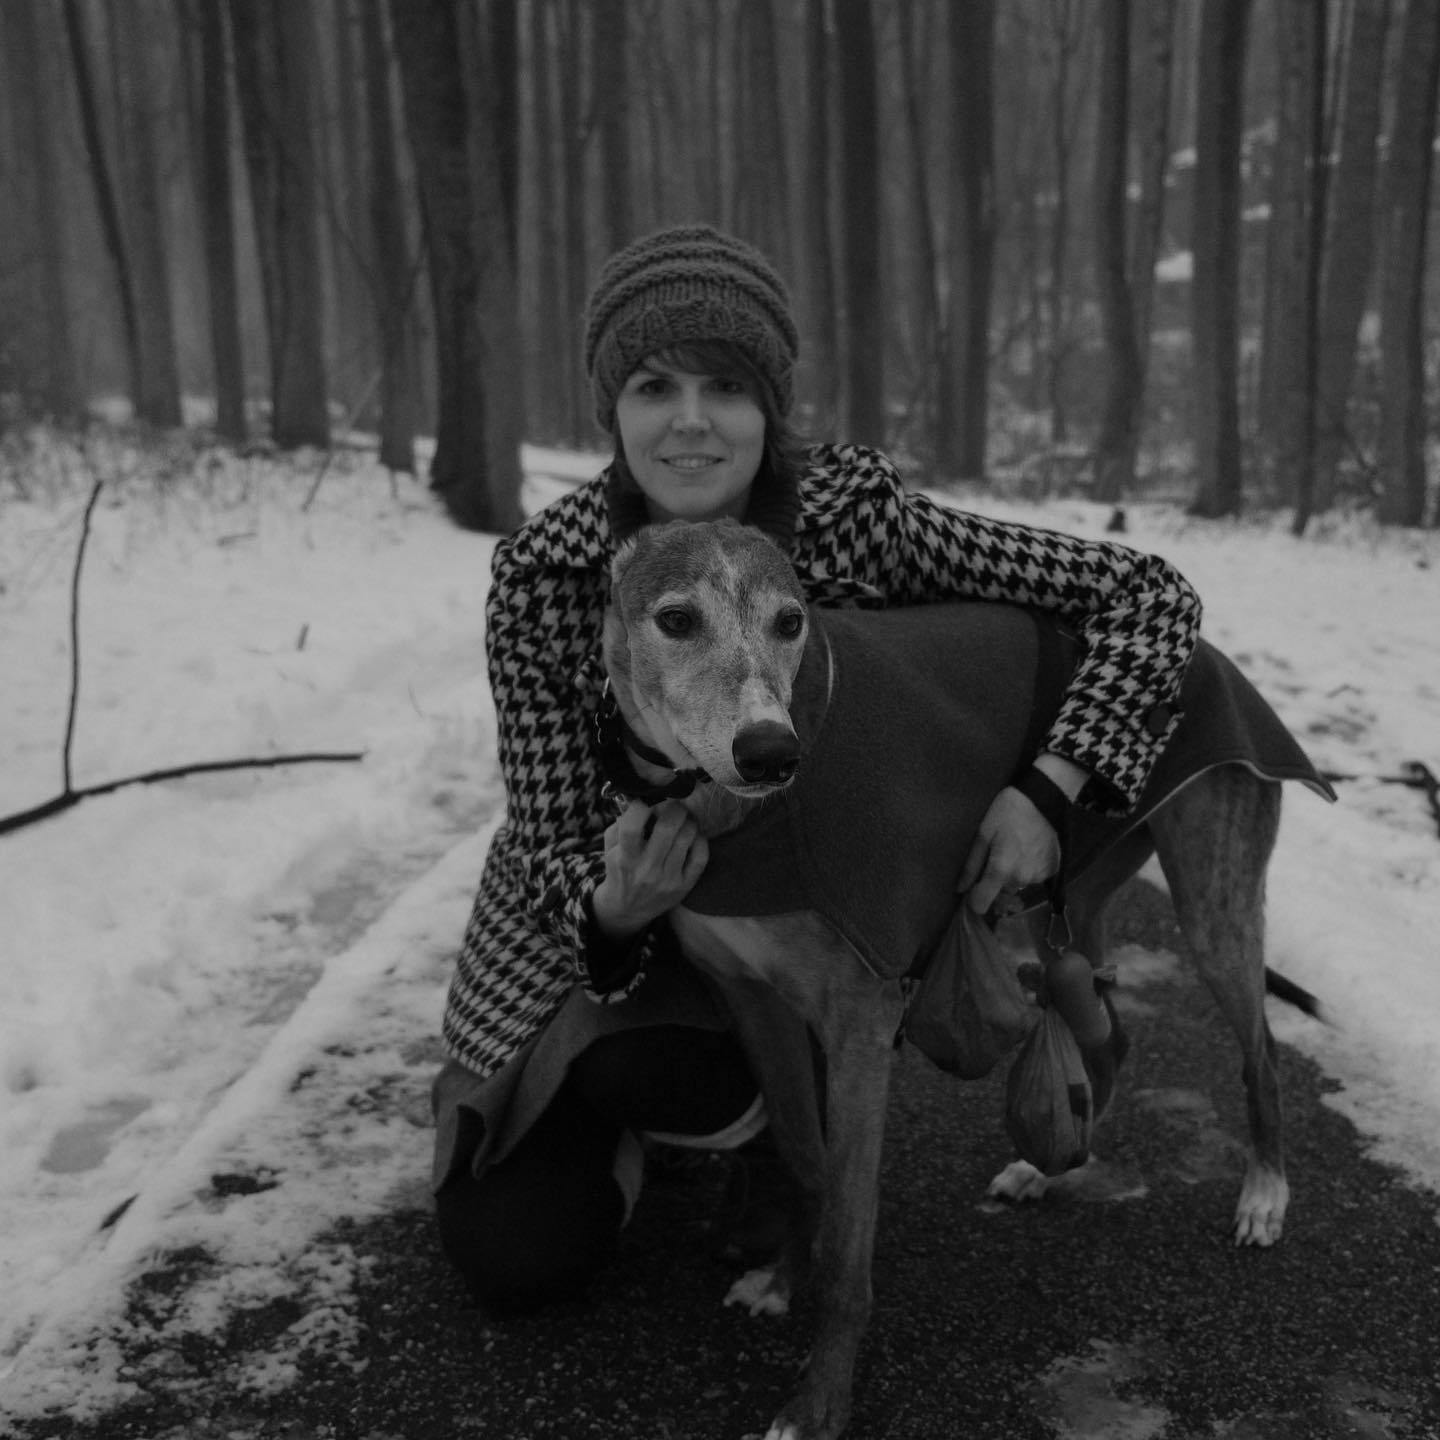 Jackie, posing with a young Kepler (our pet greyhound) on a snowy day in the woods.